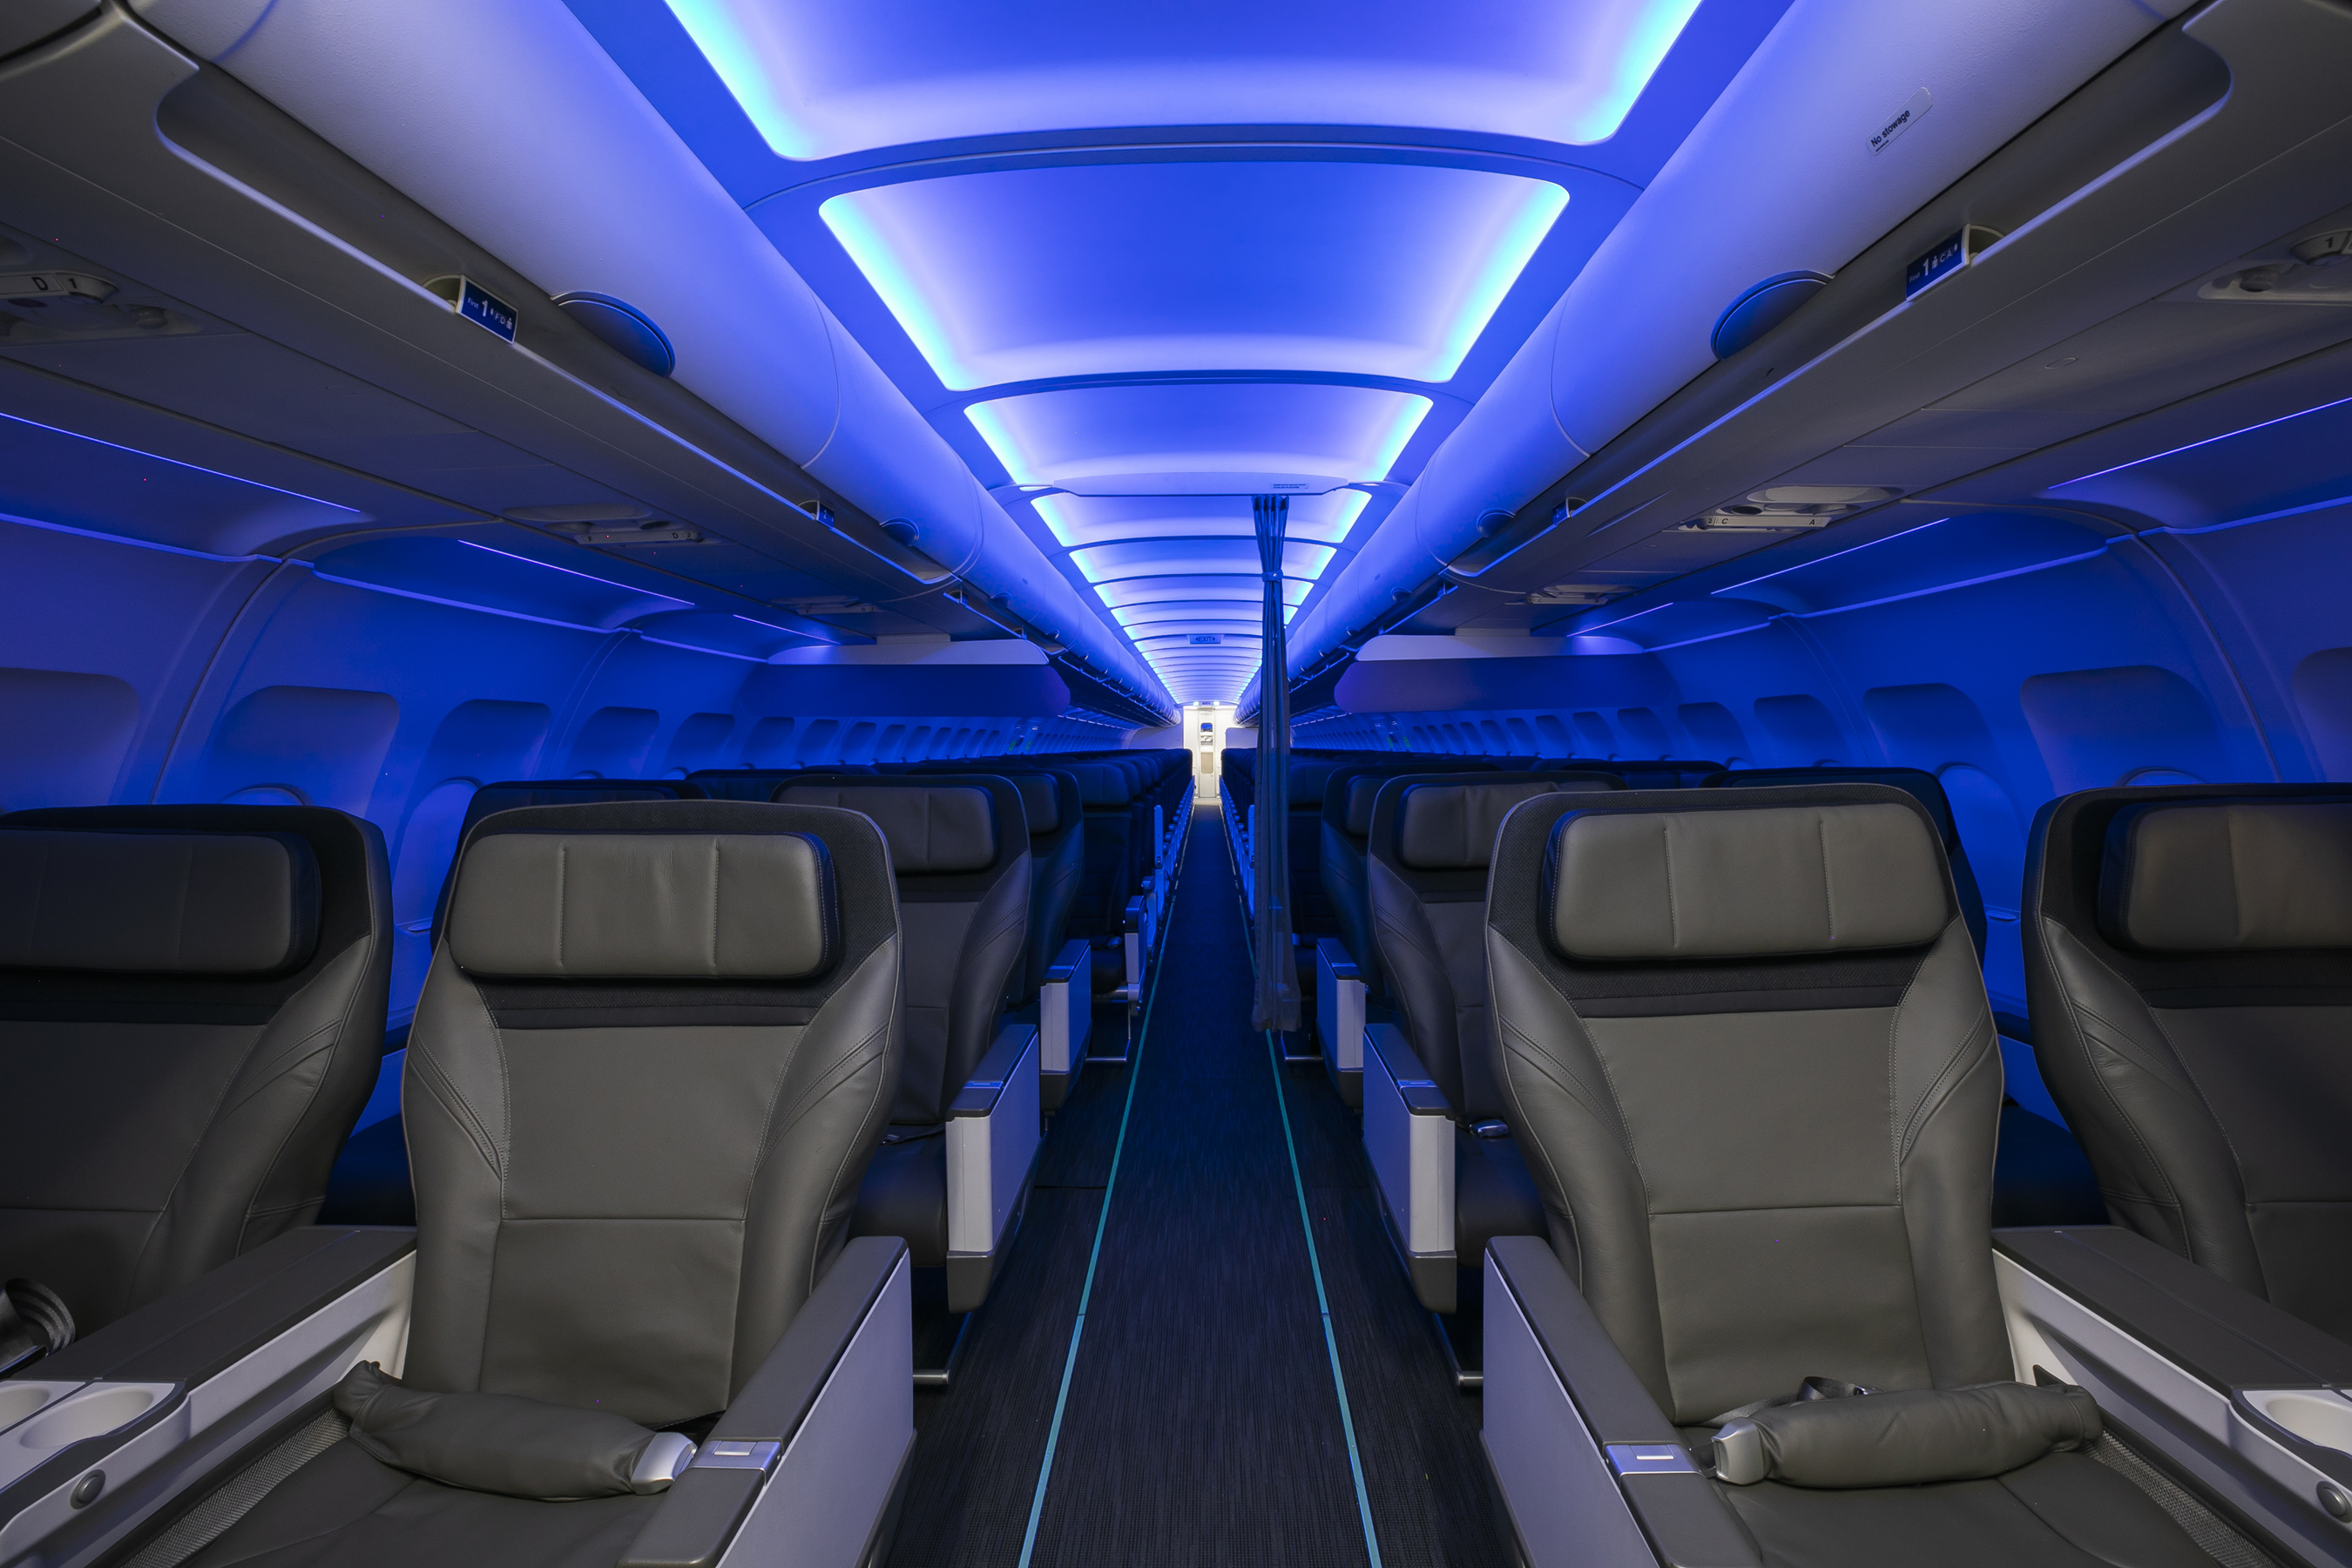 Ambient mood lighting with calming blue hues complements the human body’s natural circadian rhythm, promoting rest or productivity depending on the time of day. The curated onboard music program has a cool West Coast vibe that balances the relaxing and modern ambiance.